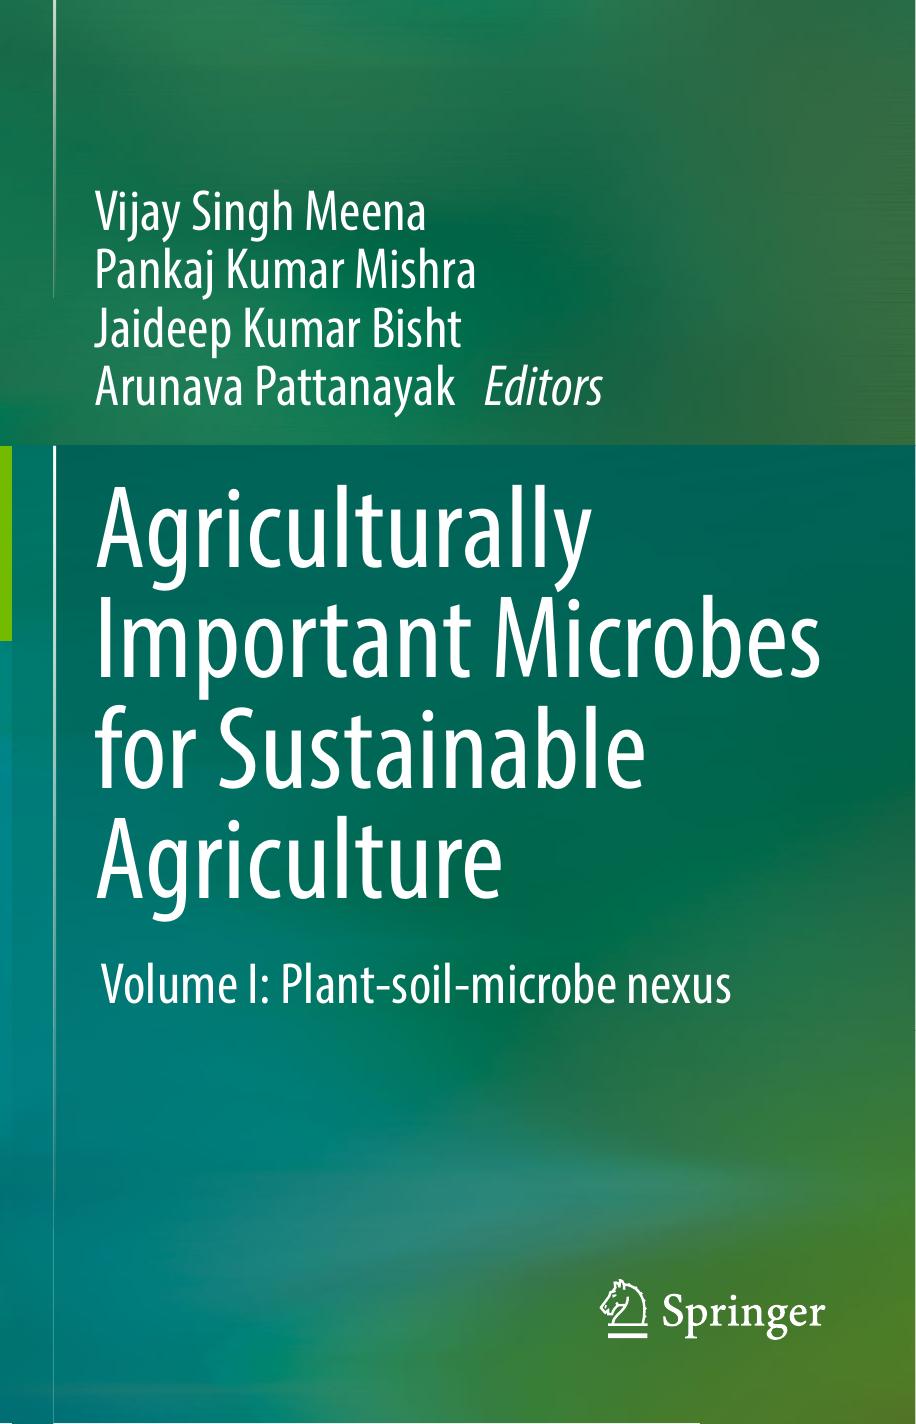 Agriculturally Important Microbes for Sustainable Agriculture Volume I Plant-soil-microbe nexus 2017